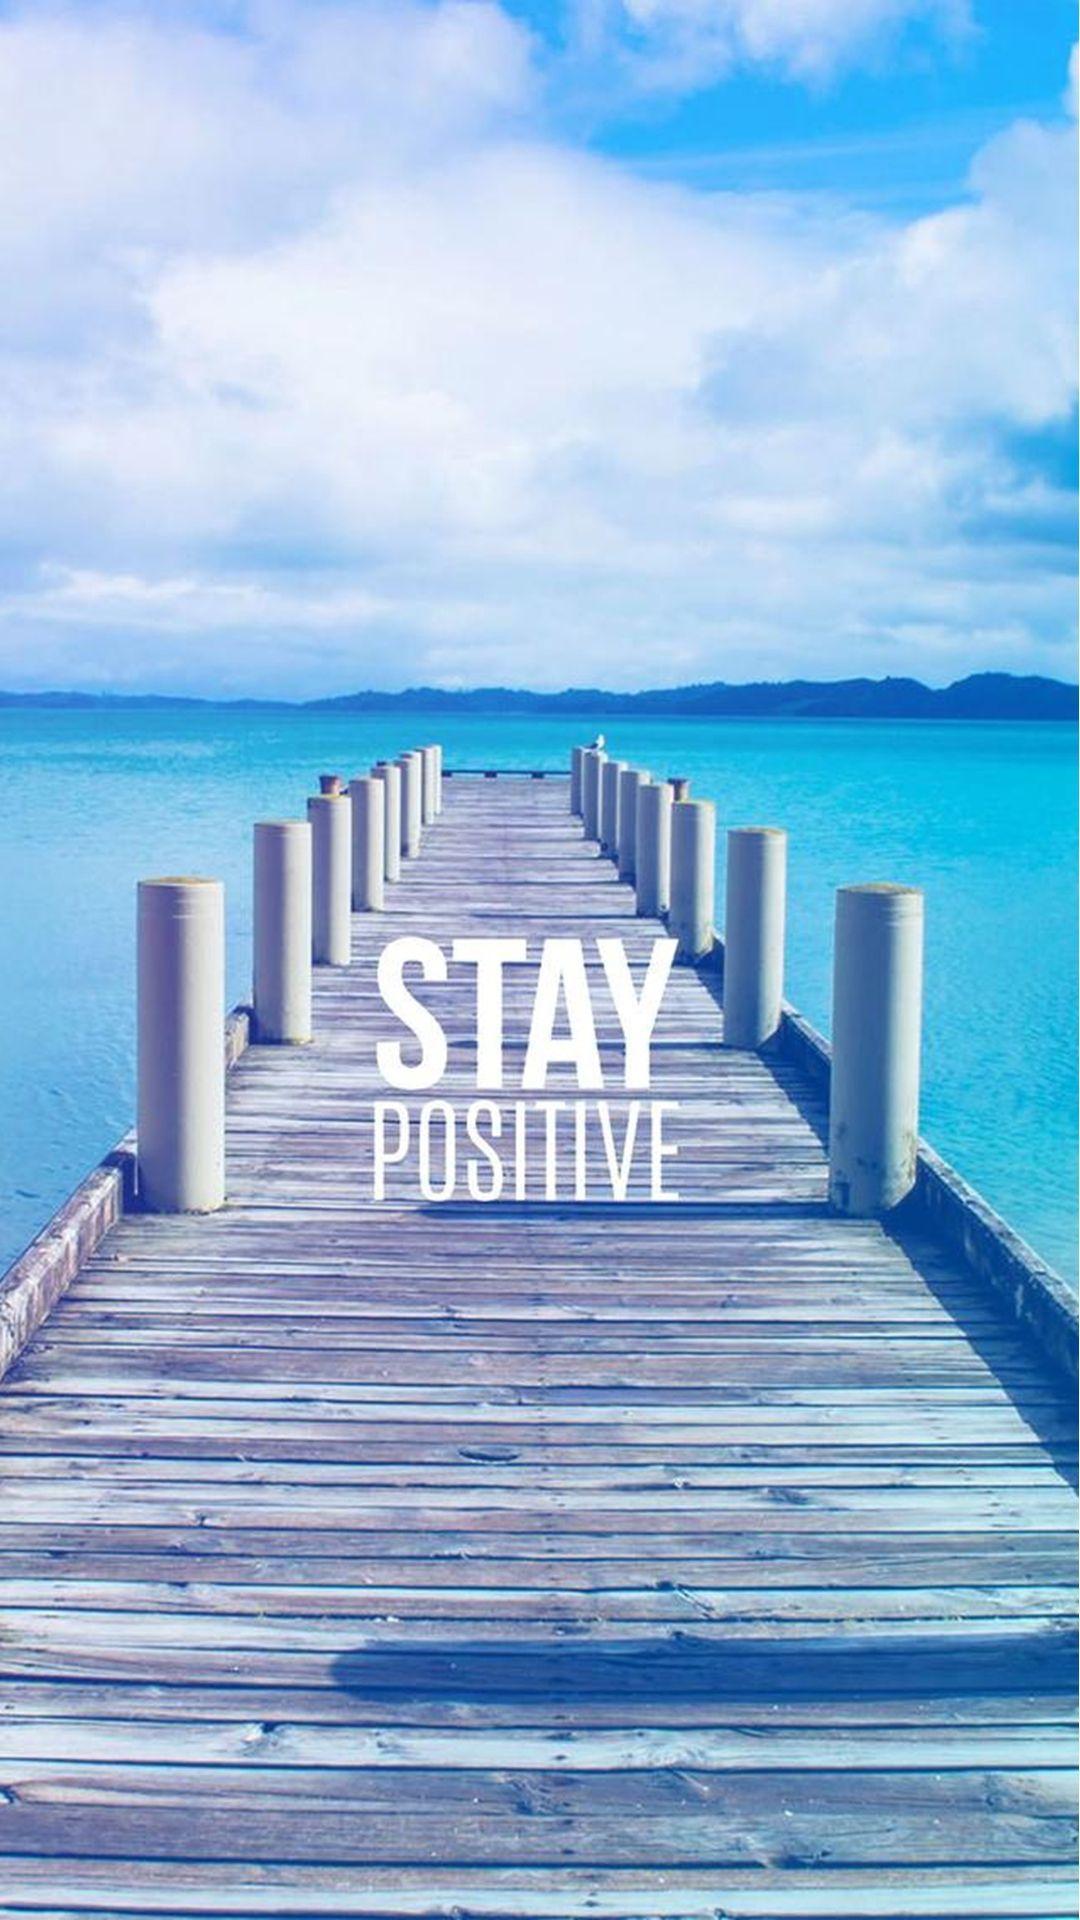 Stay Positive Motivational iPhone 6 wallpaper. words